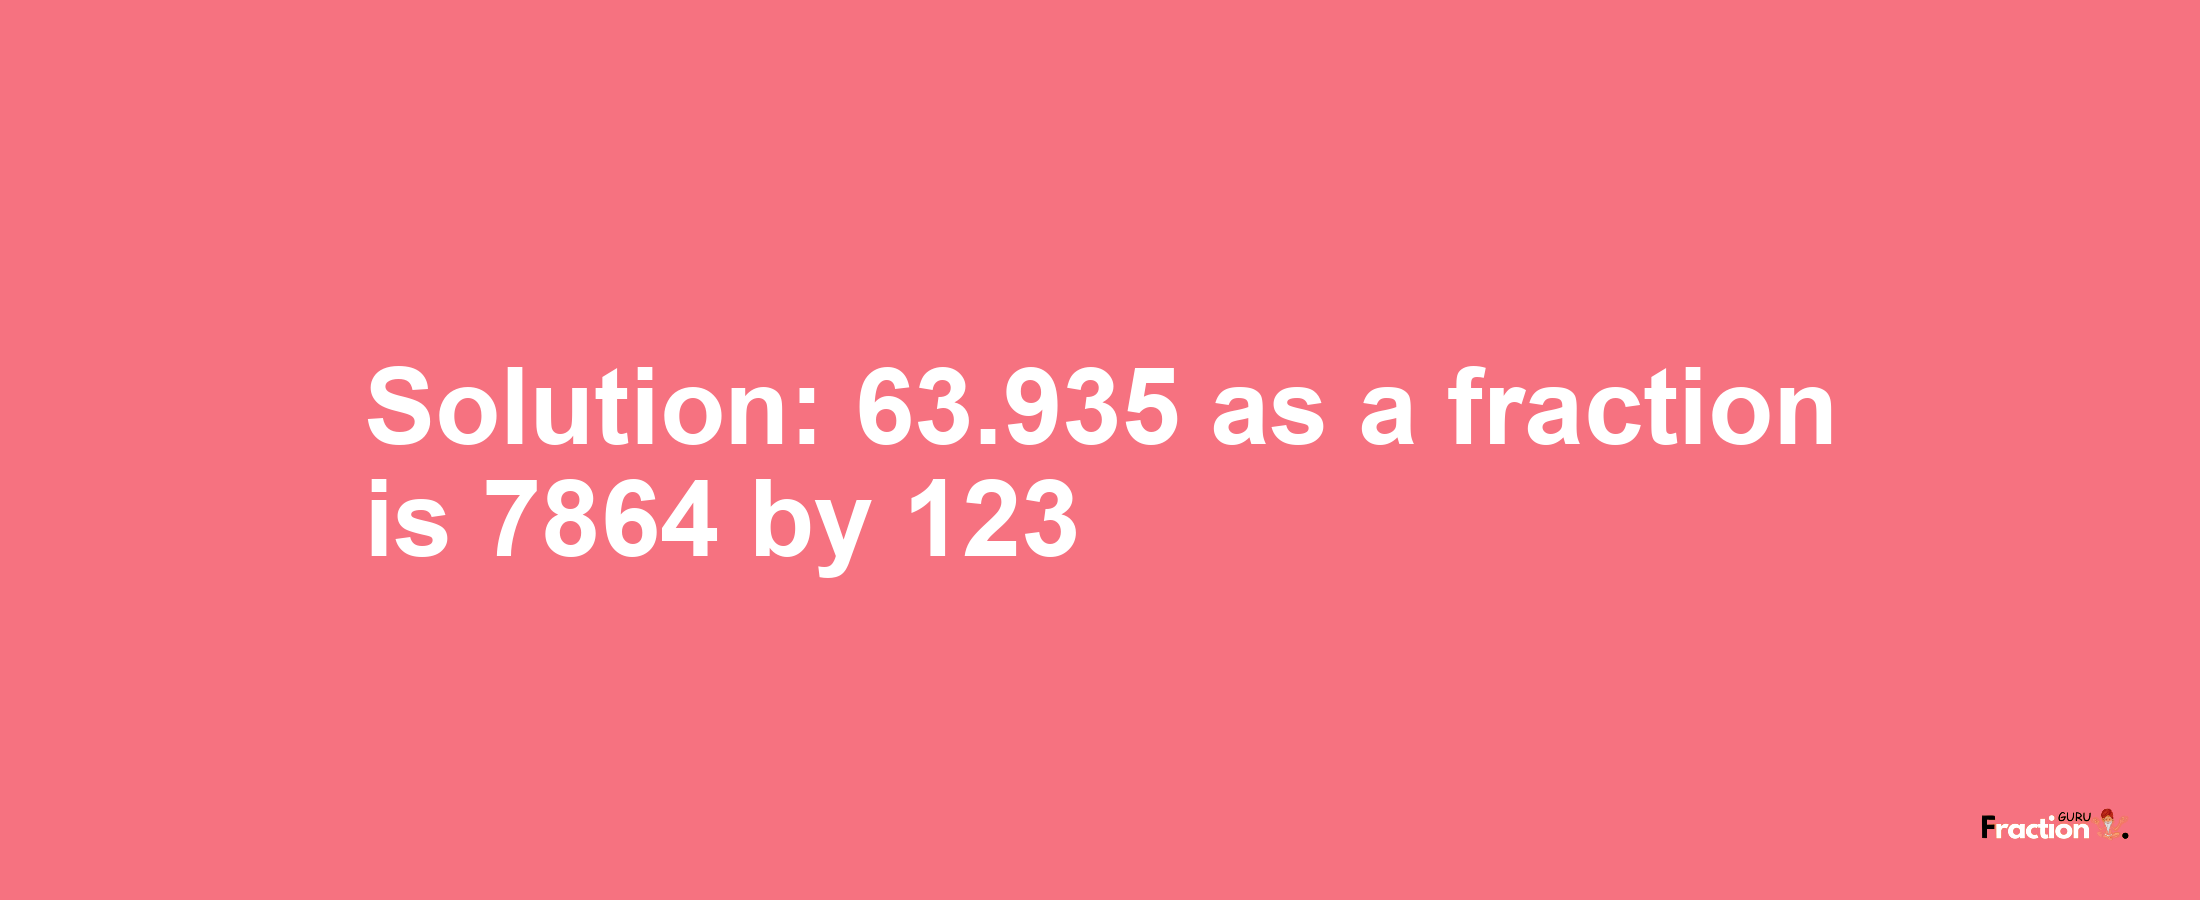 Solution:63.935 as a fraction is 7864/123